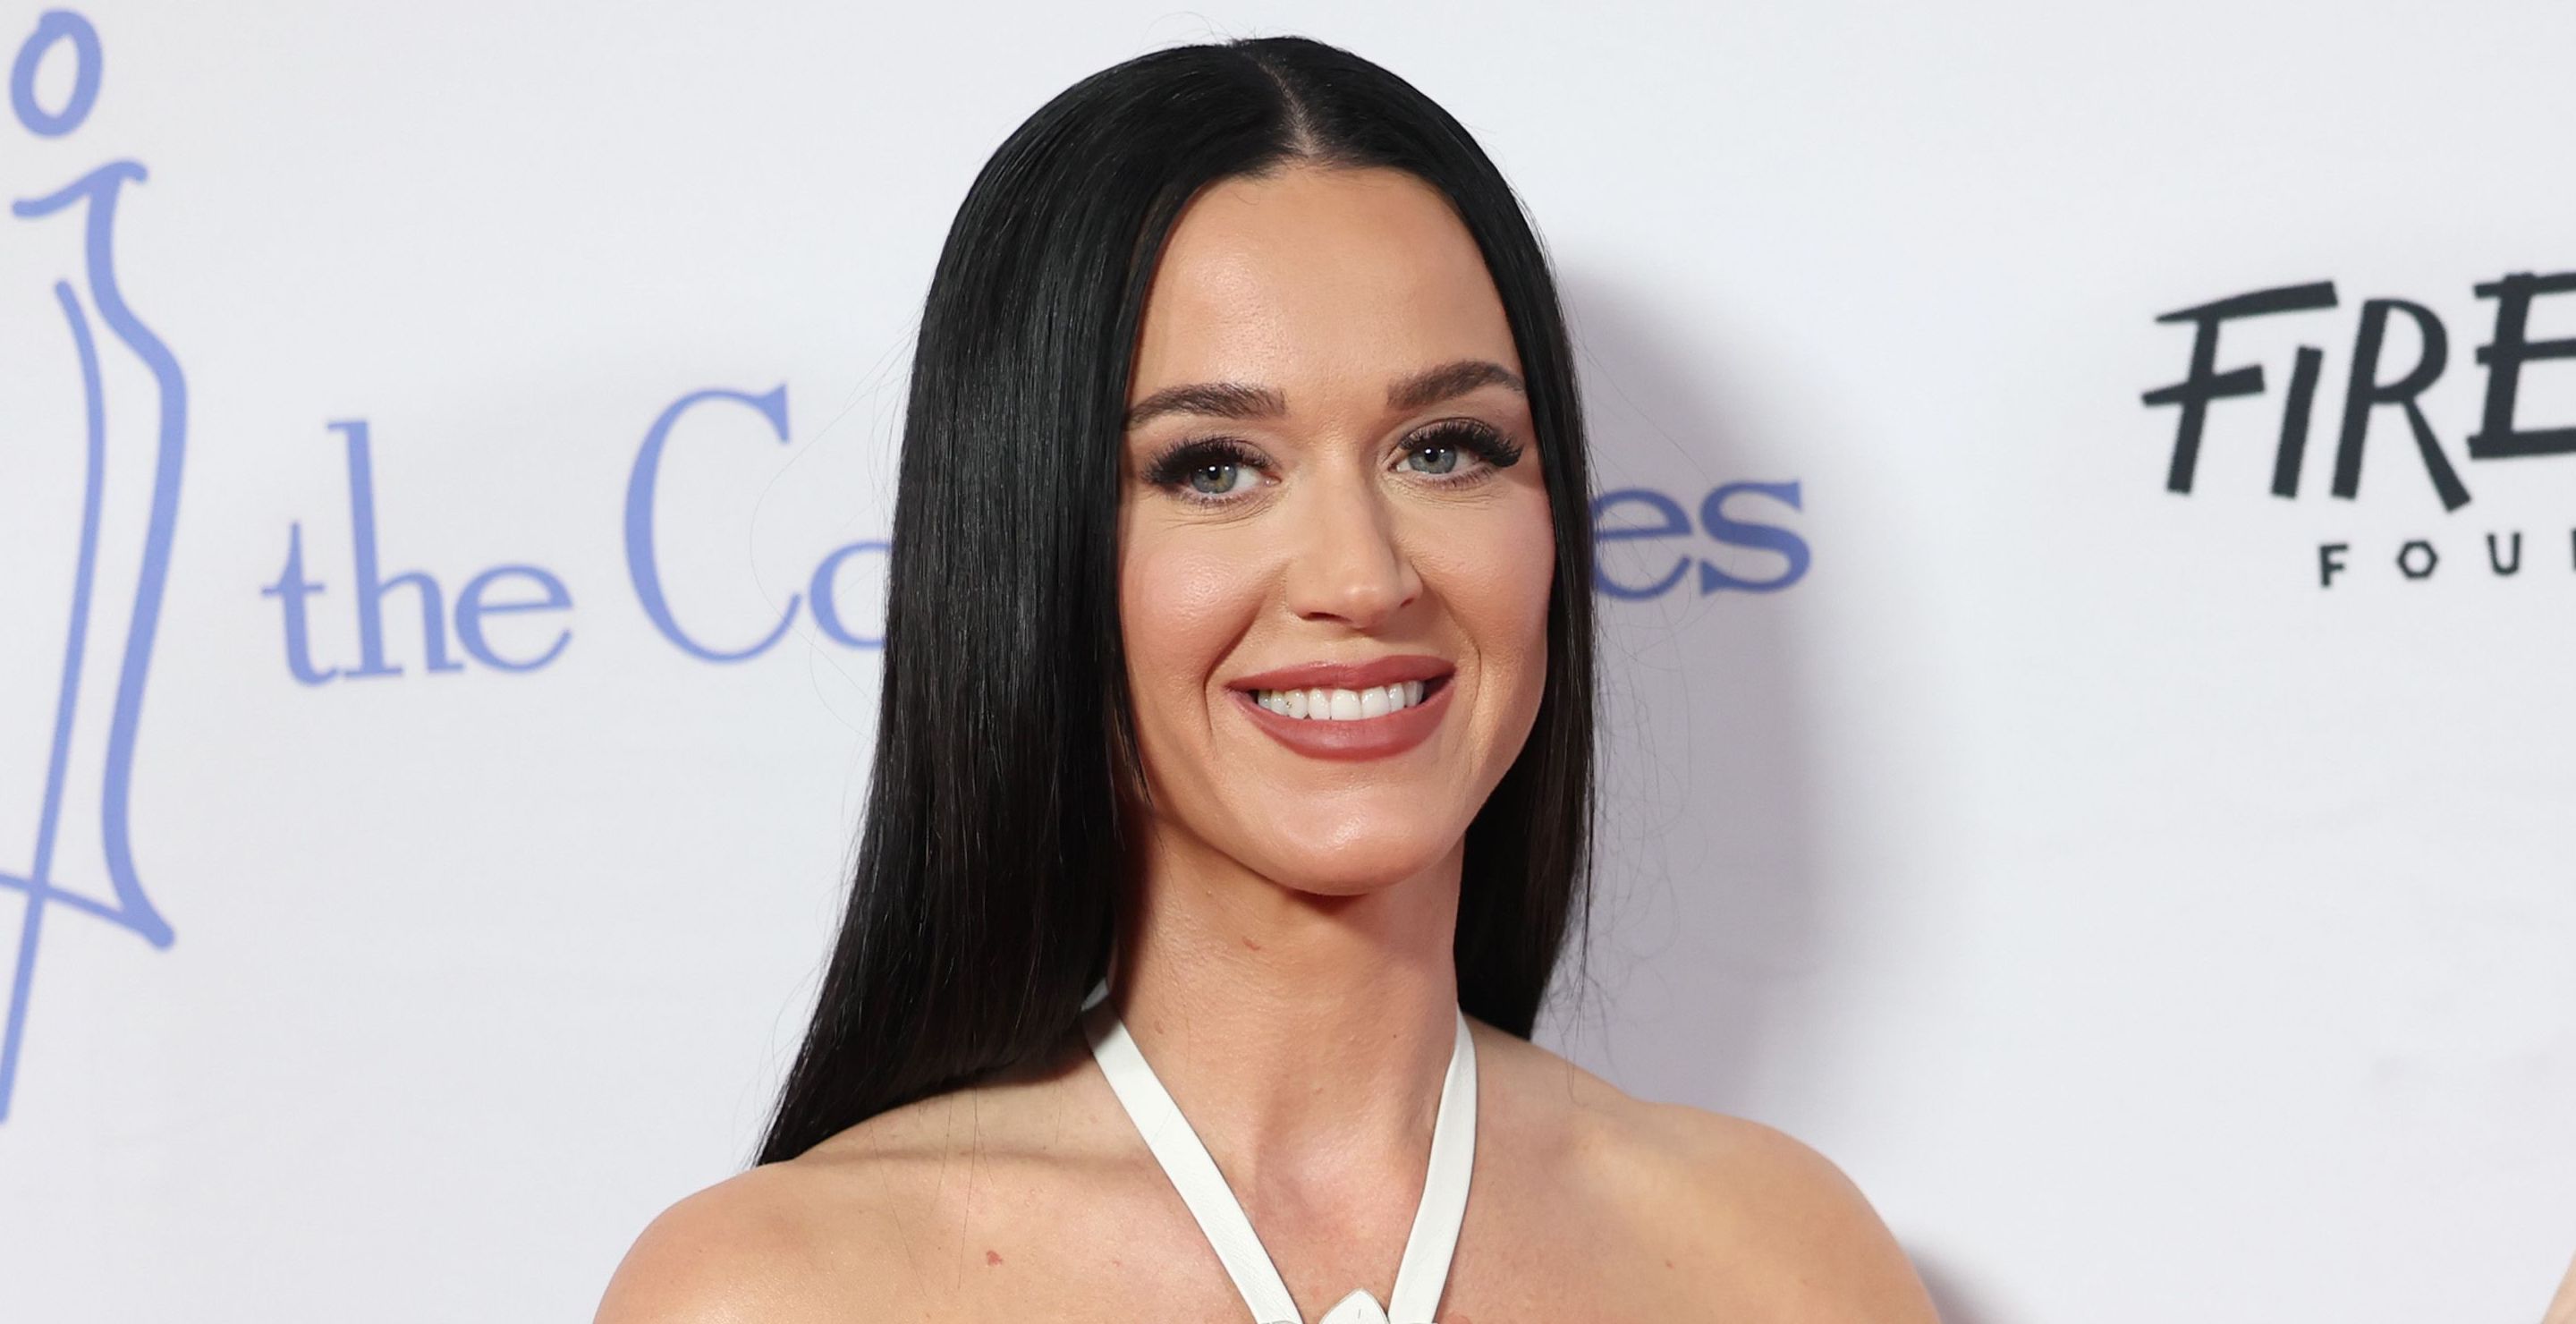 Katy Perry Should've Stuck to American Idol After New Single